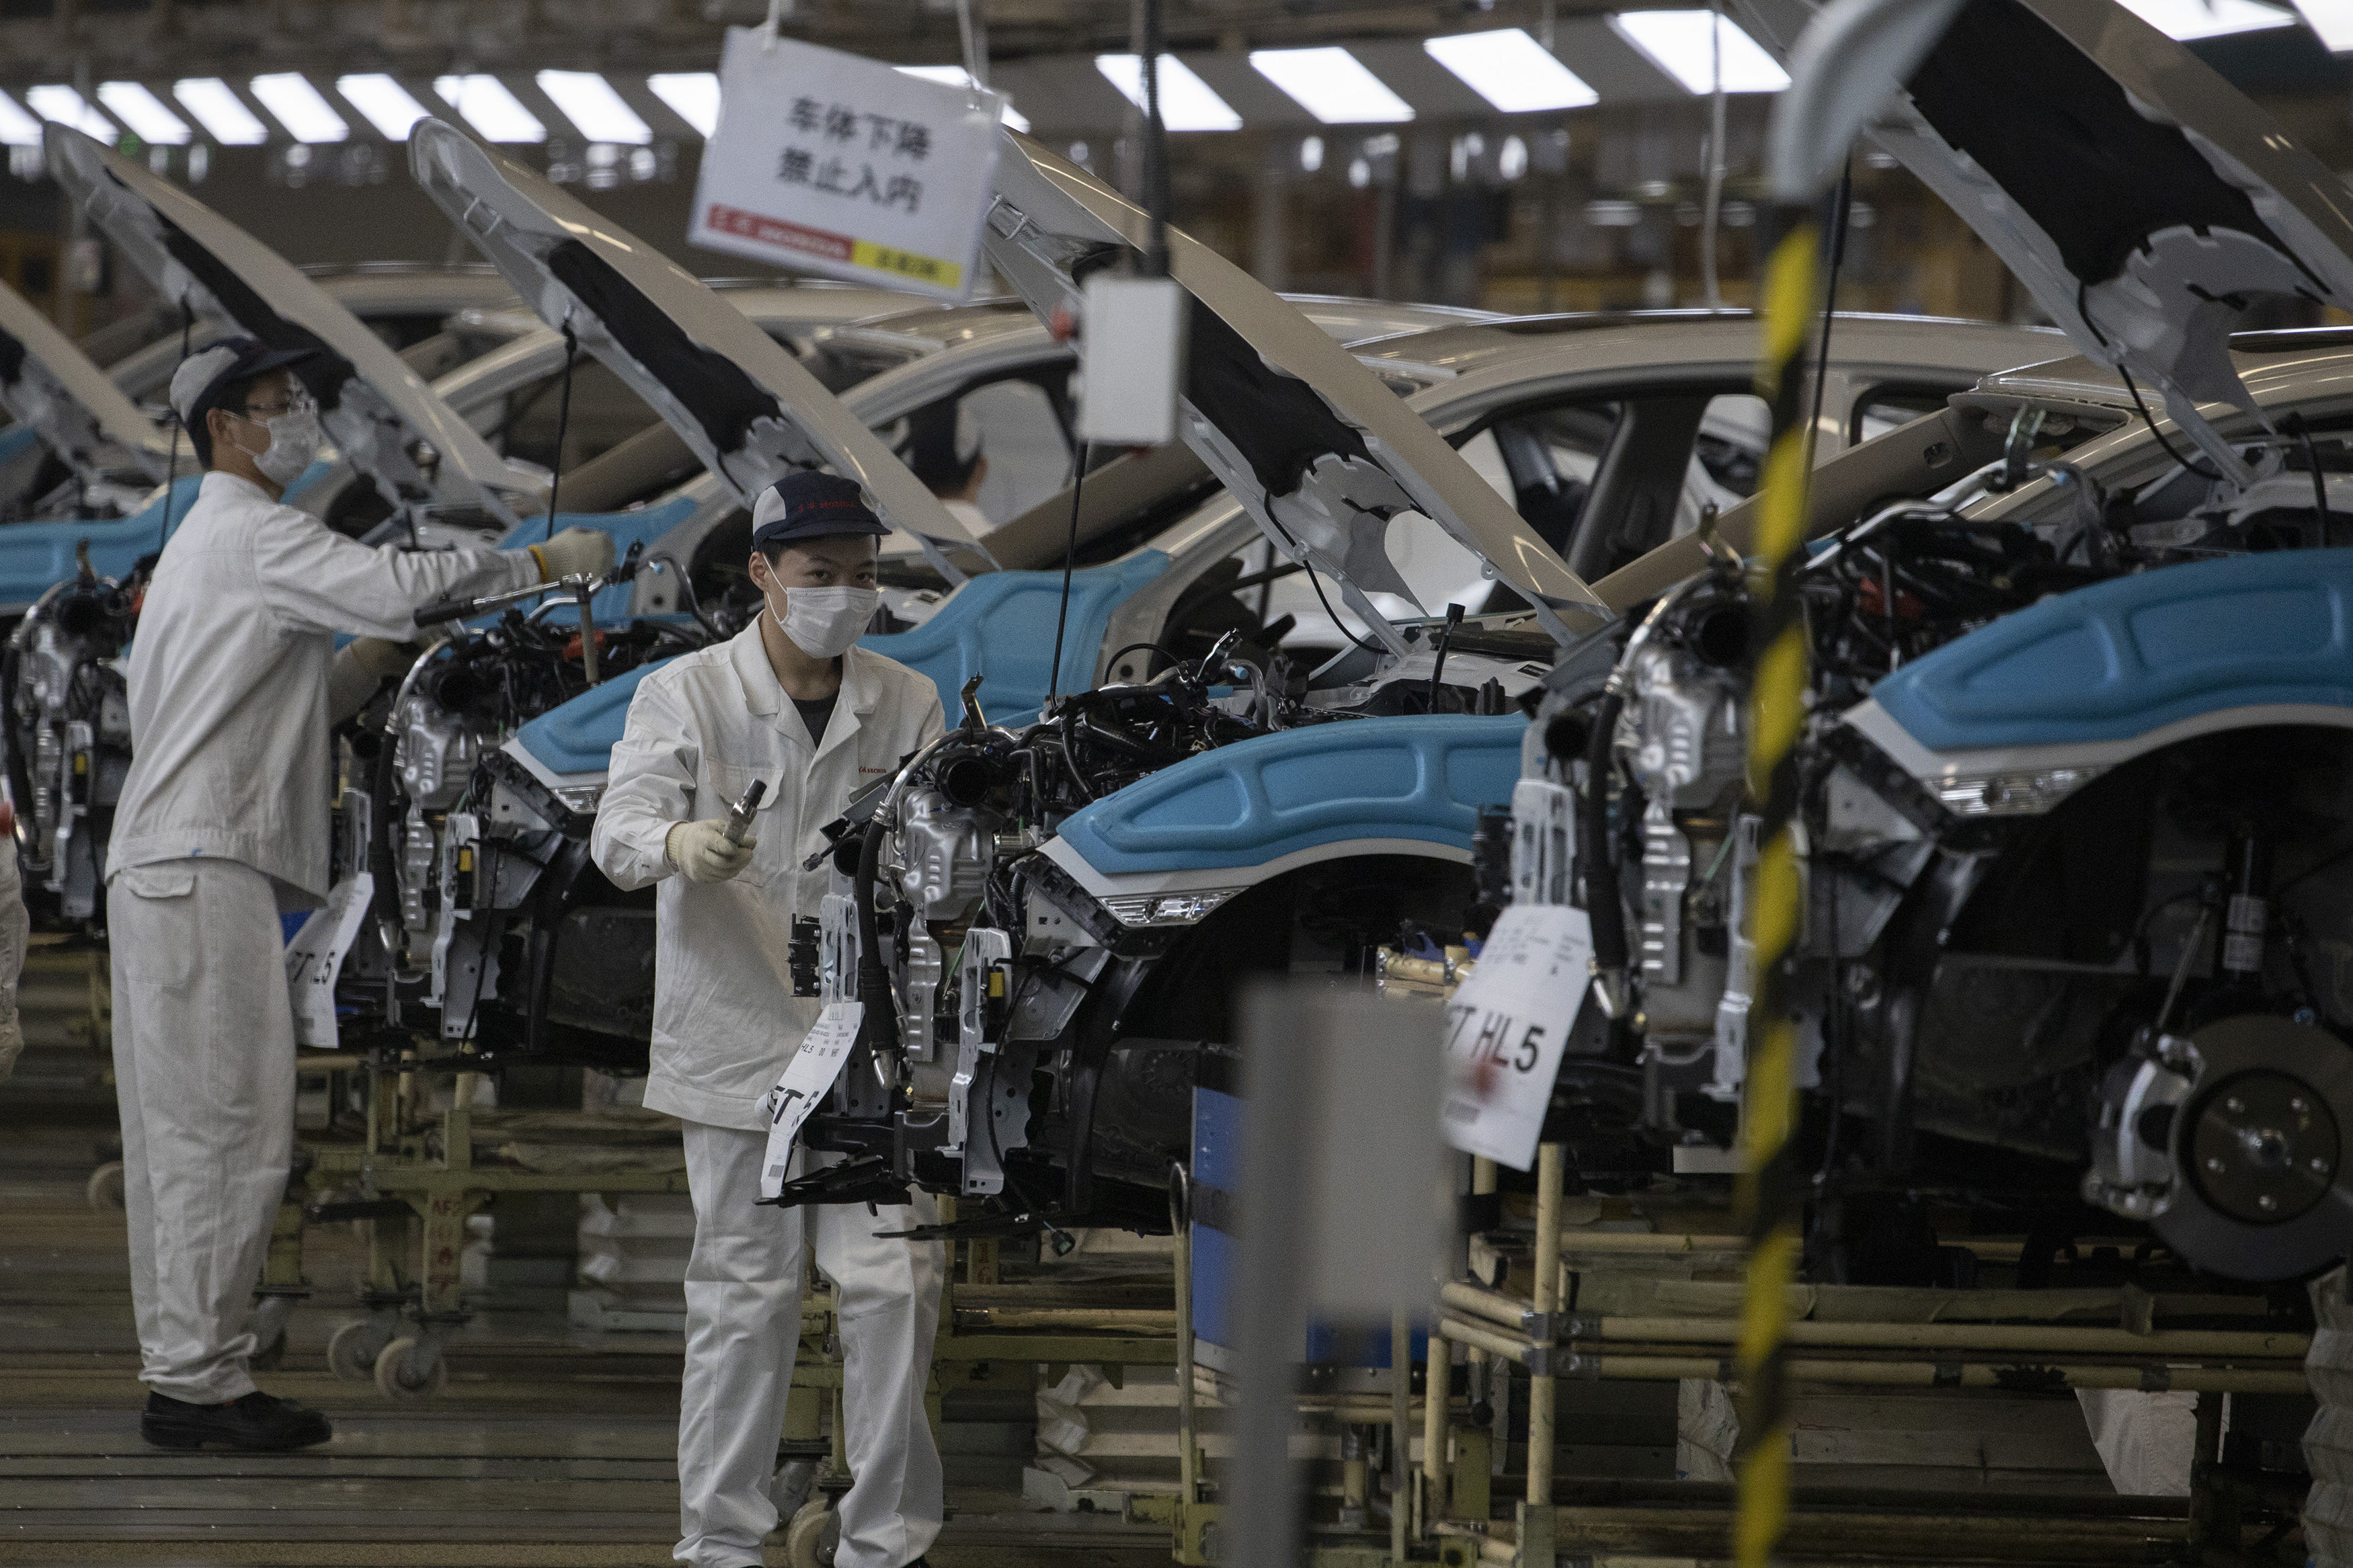 File photo - In this photo dated April 8, 2020, employees work on a car assembly line at the Dongfeng Honda Automobile Co., Ltd factory in Wuhan in central China's Hubei province.